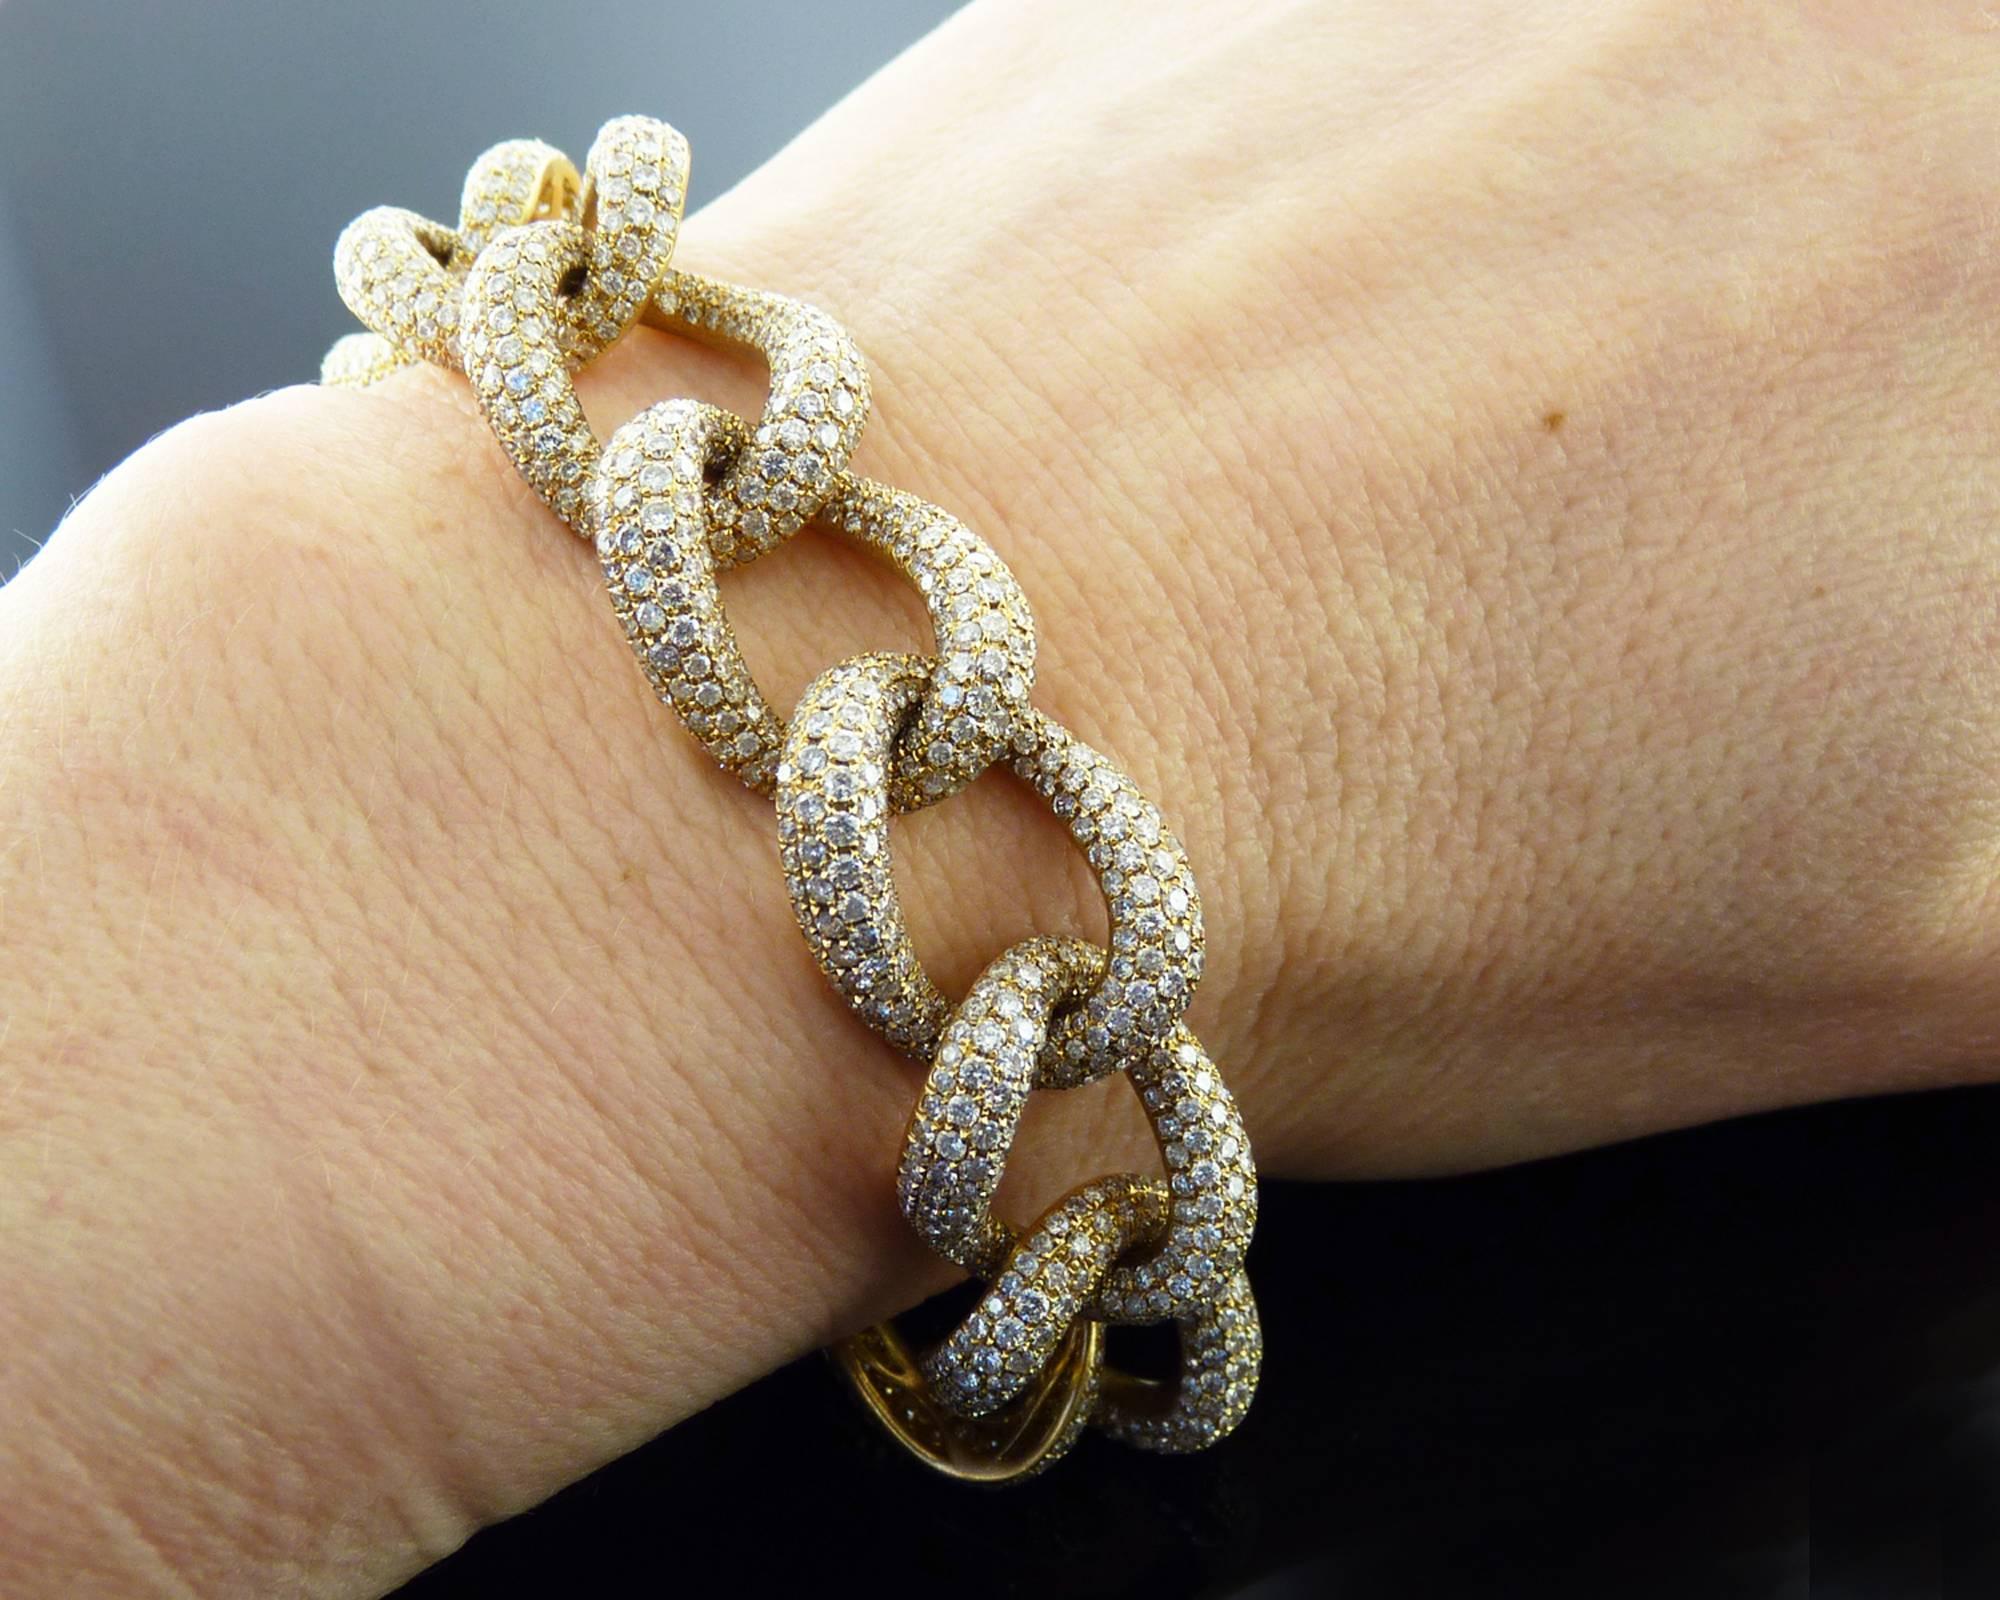 A beautiful and wearable link bracelet featuring pave diamonds on the face of the bracelet. 
Approximate weight of diamonds is 6-8 carats, most with G-H color, VS-SI clarity.
Metal is 18kt yellow gold.
Measurements:
8 inches long;
0.6 inches